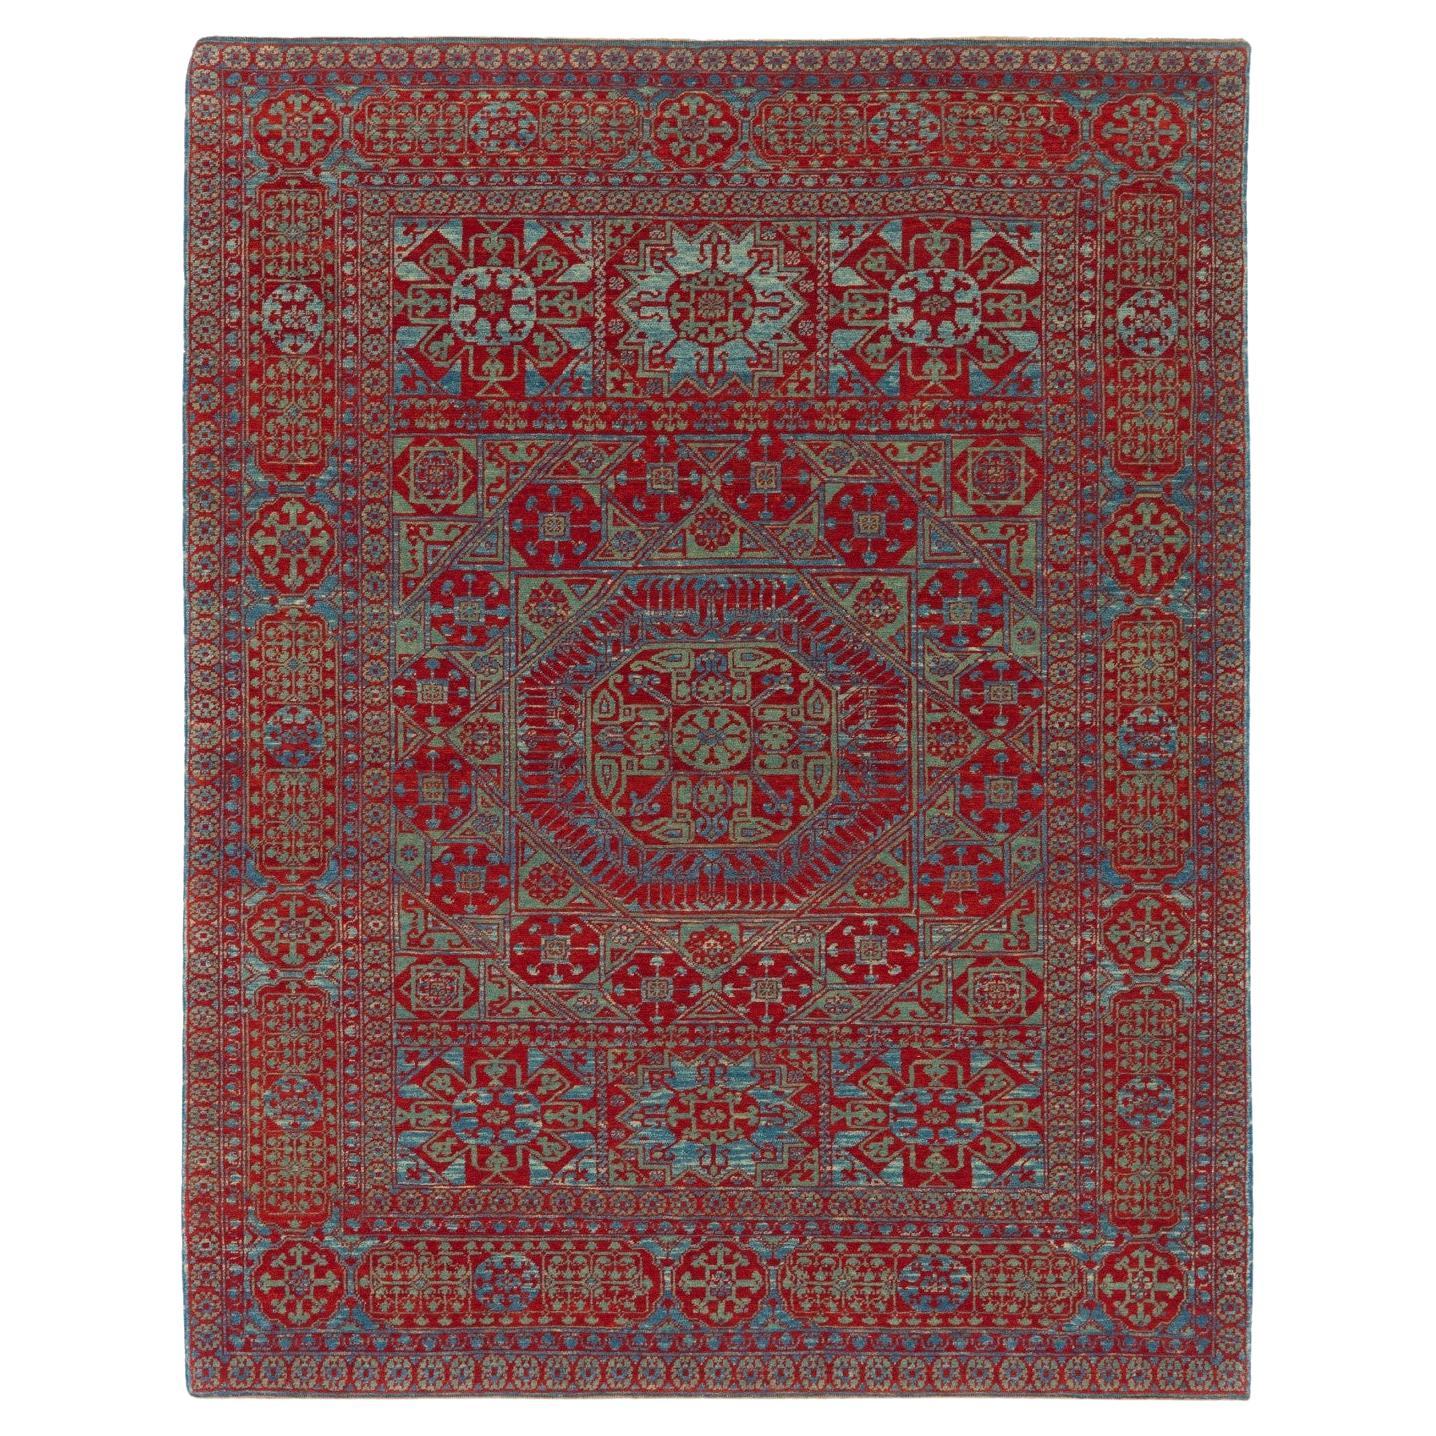 Ararat Rugs Mamluk Rug with Central Star 16th Cent. Revival Carpet Natural Dyed